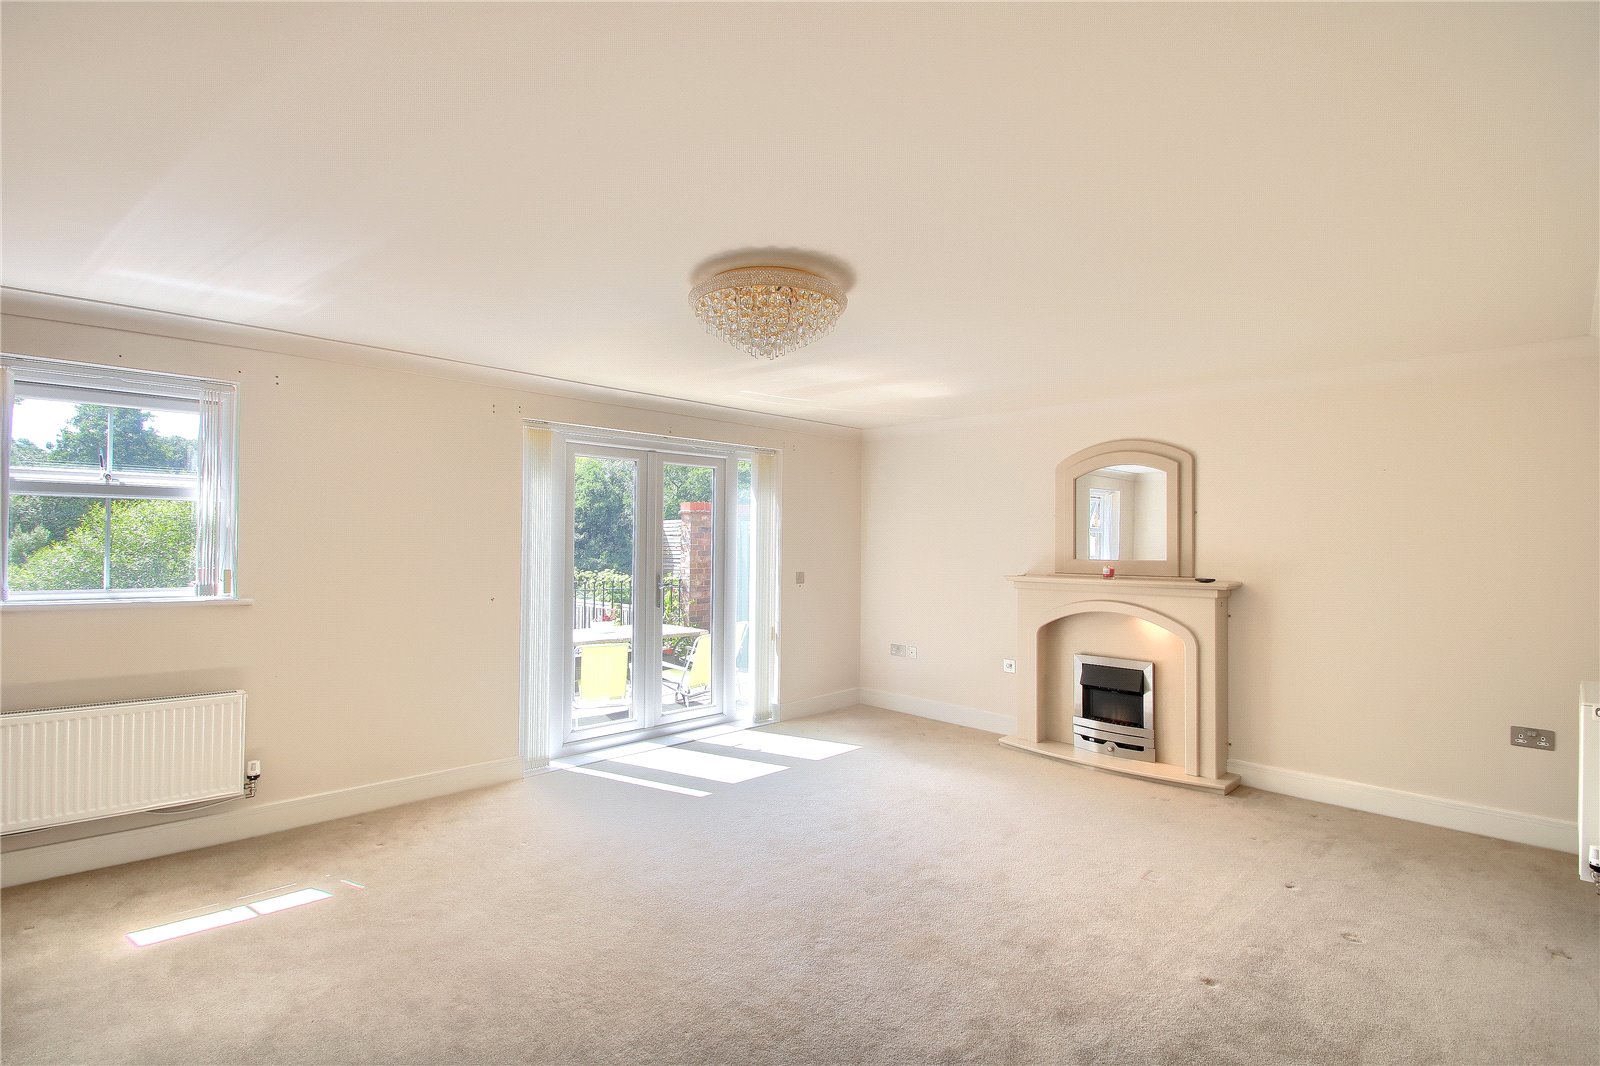 5 bed house for sale in Bridgewater, Leven Bank  - Property Image 3